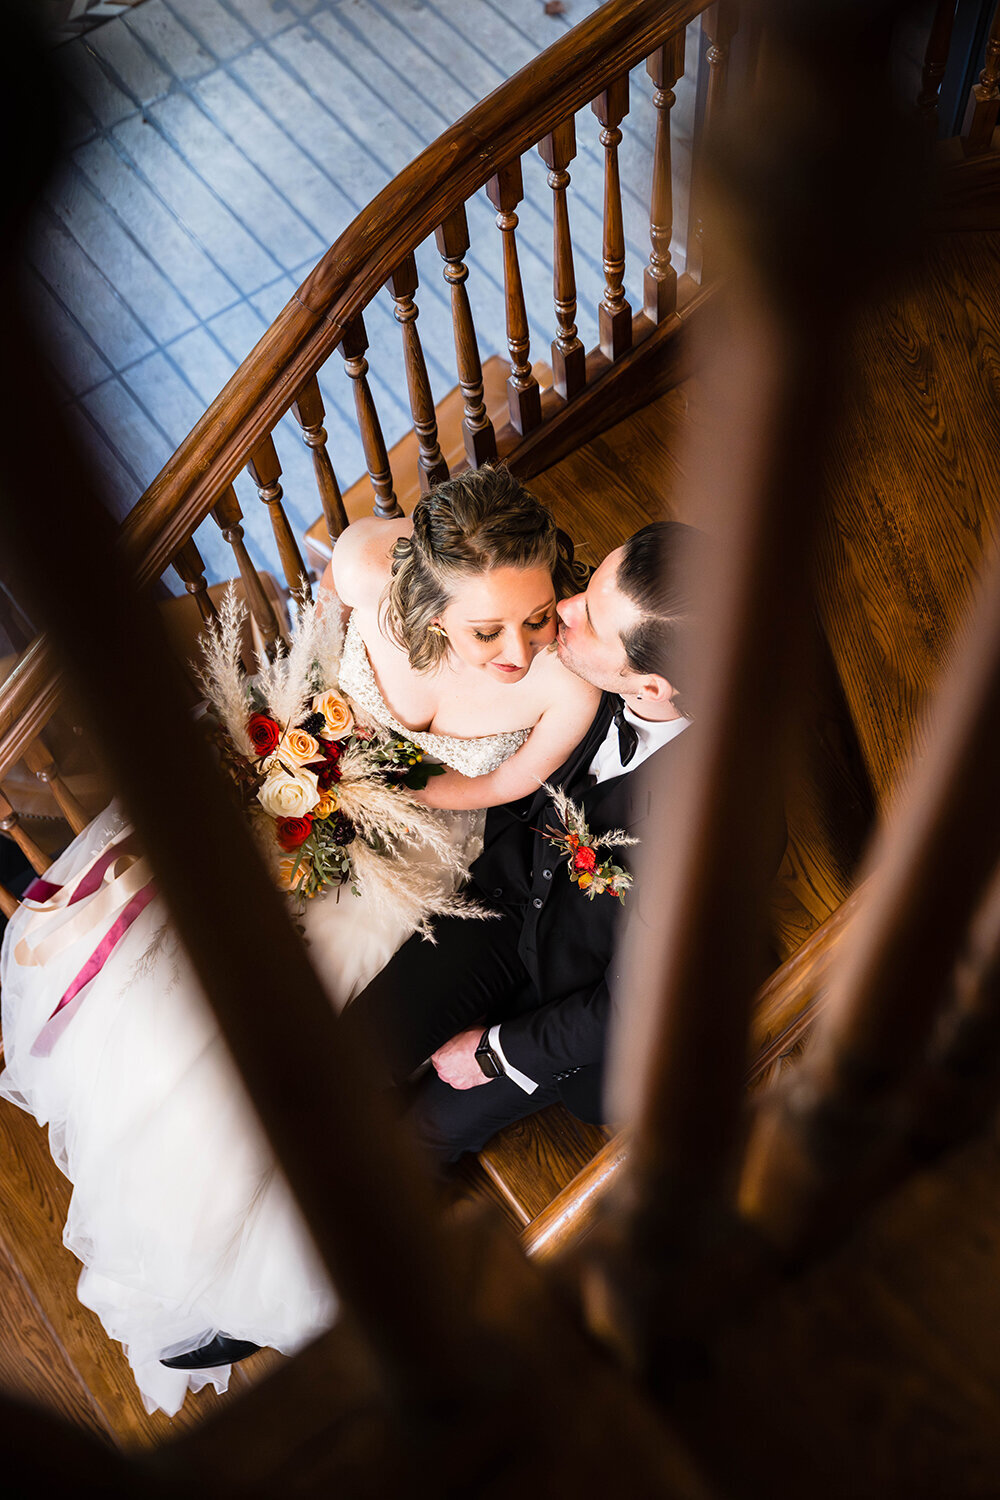 A couple on their elopement day sit side-by-side in a stairwell in a hotel located in Downtown Roanoke on their elopement day. The groom kisses the bride on the cheek while the bride smiles. A photo of them is taken through slits in the stairwell.